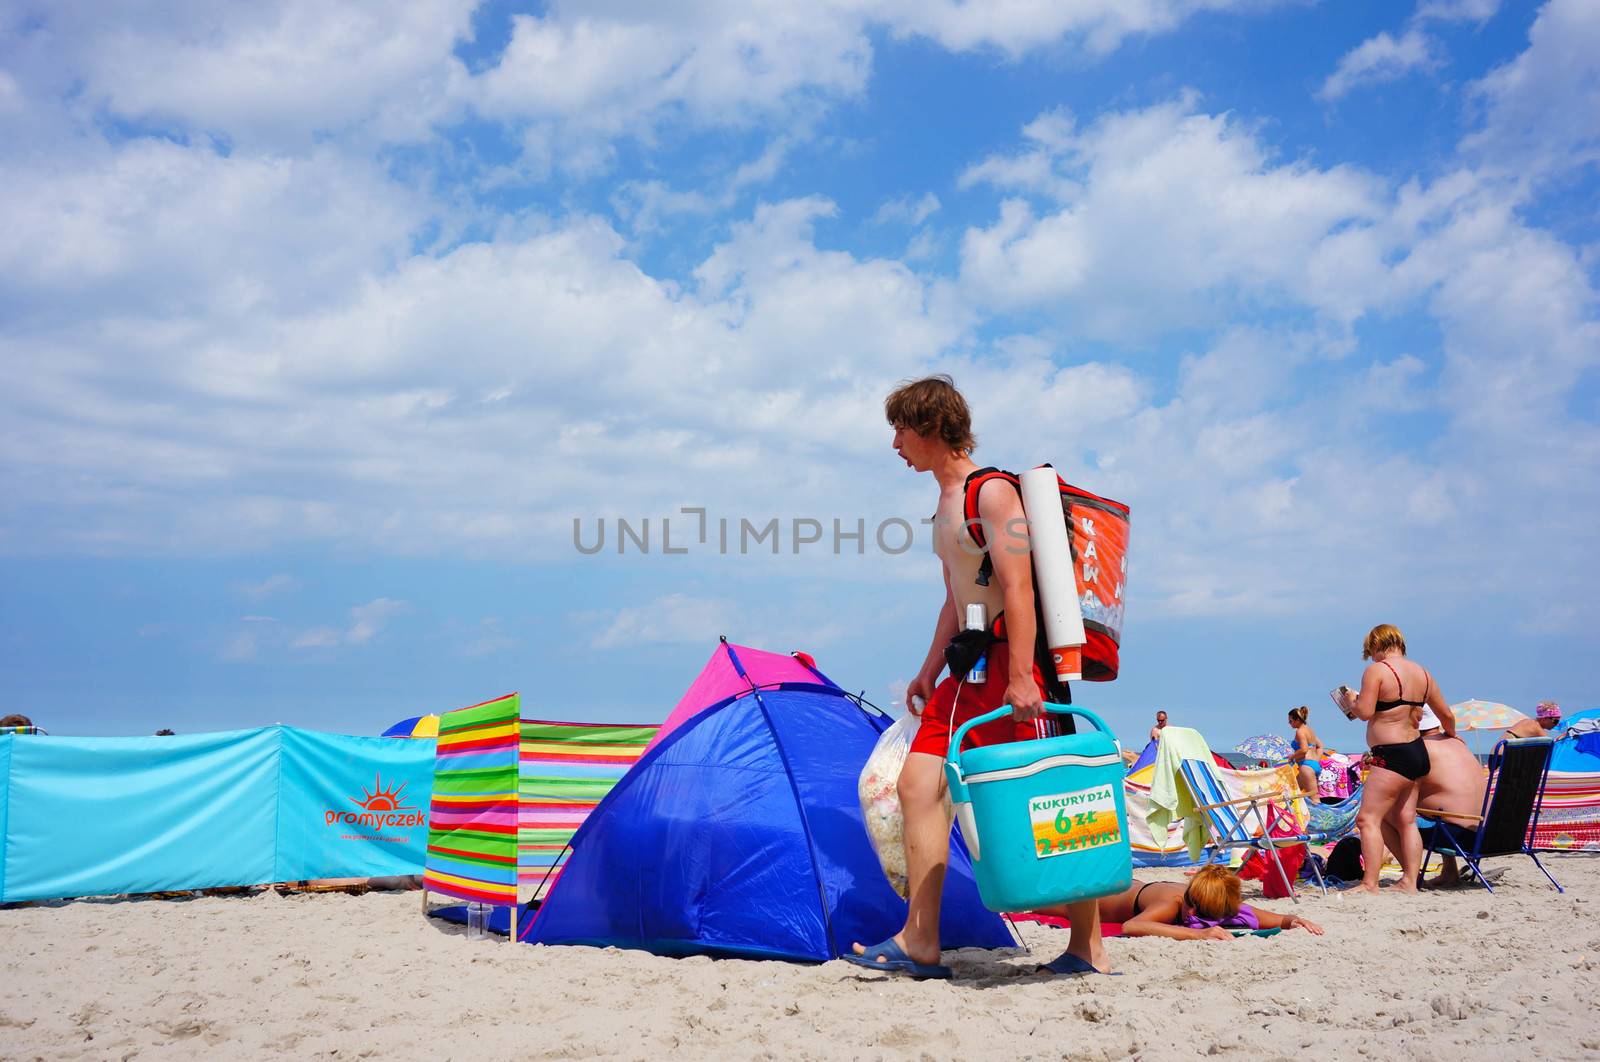 SIANOZETY, POLAND - JULY 22, 2015: Man carrying food and walking on a beach